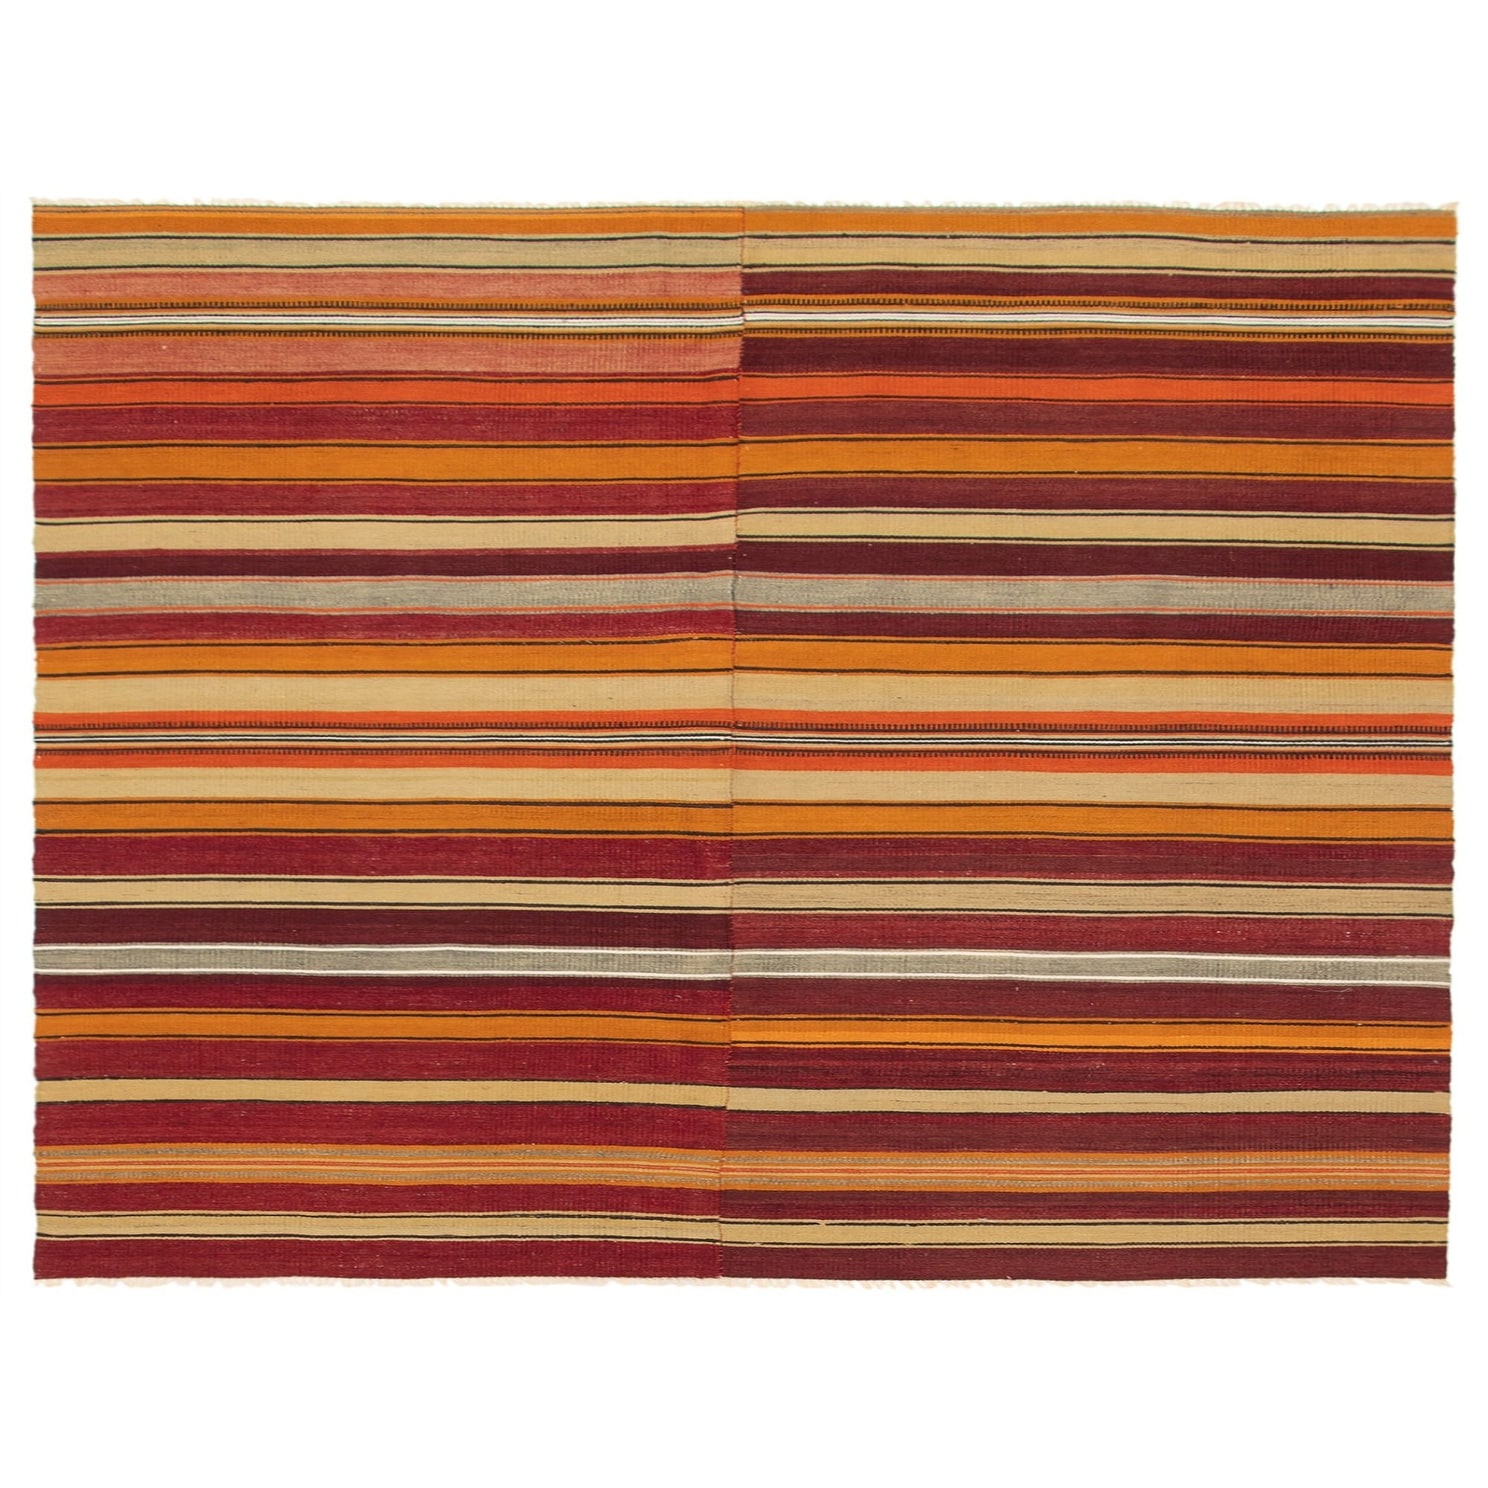 Bedroom Kalista Flat-Weaves & Kilims Red Kilim 5'5 x 7'9 346071 Hand-Knotted Wool Rug eCarpet Gallery Area Rug for Living Room 